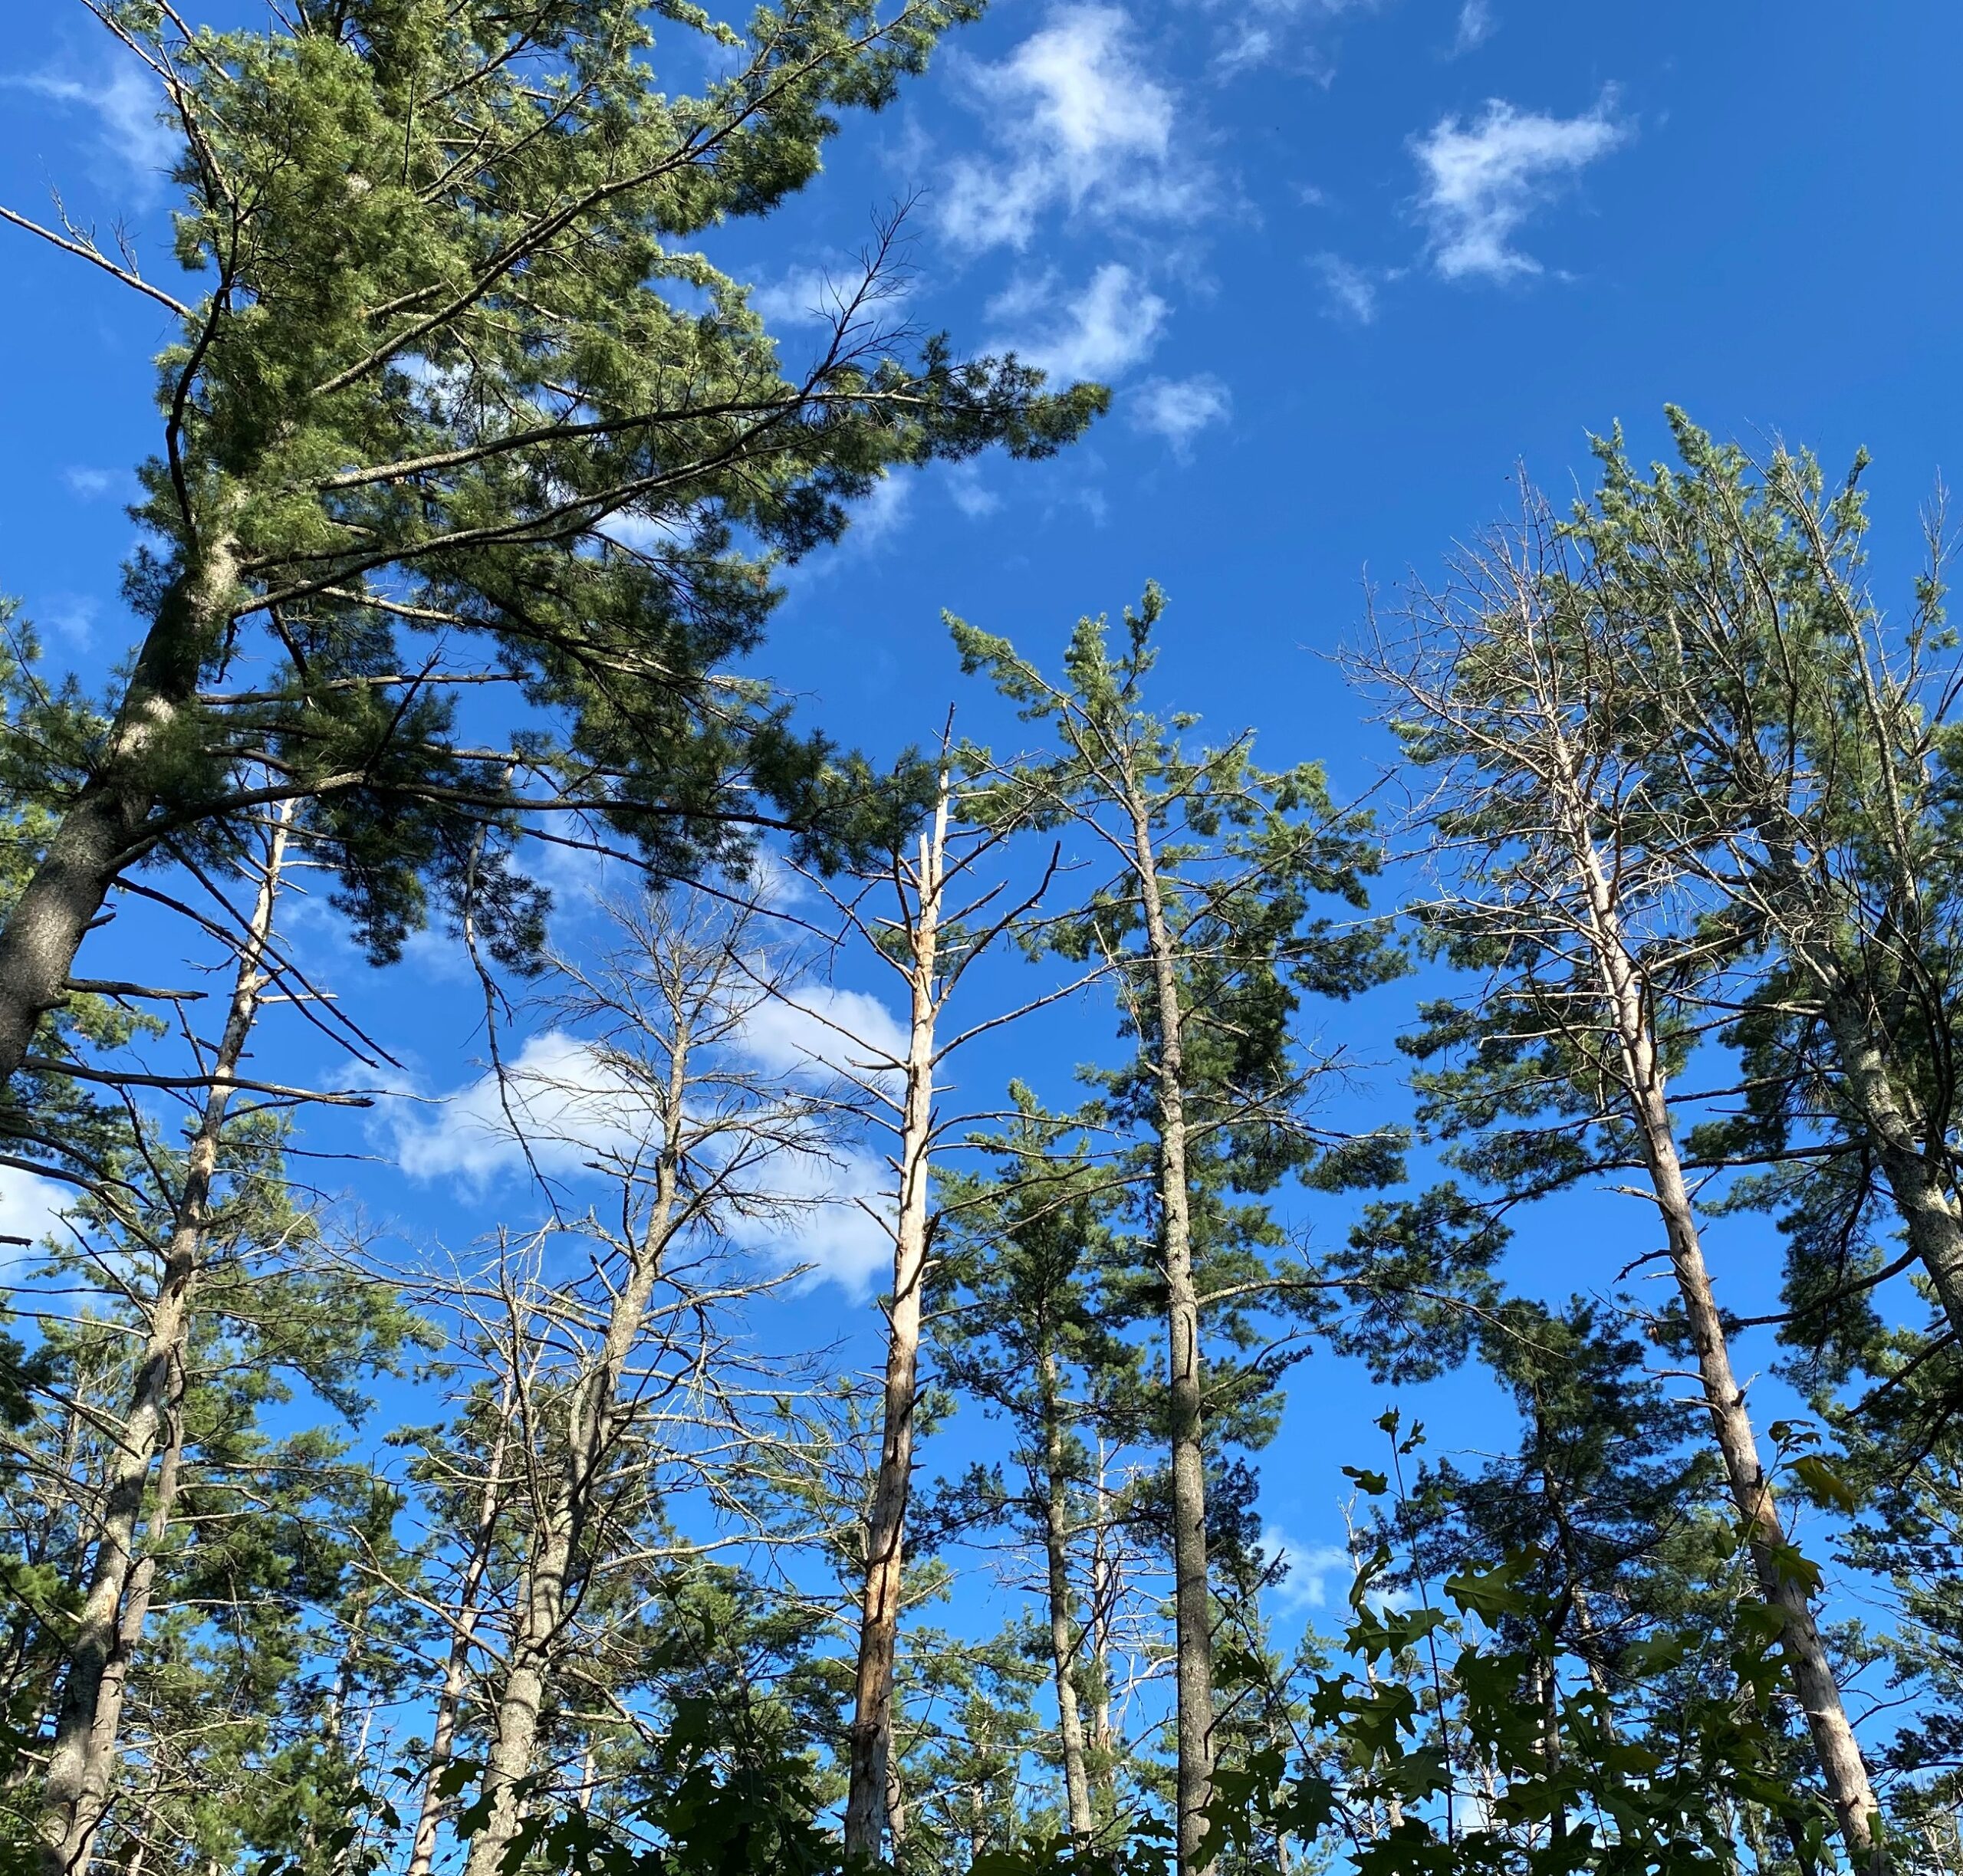 White pine canopy with rugged appearance 8 years after being damaged by a severe hailstorm.